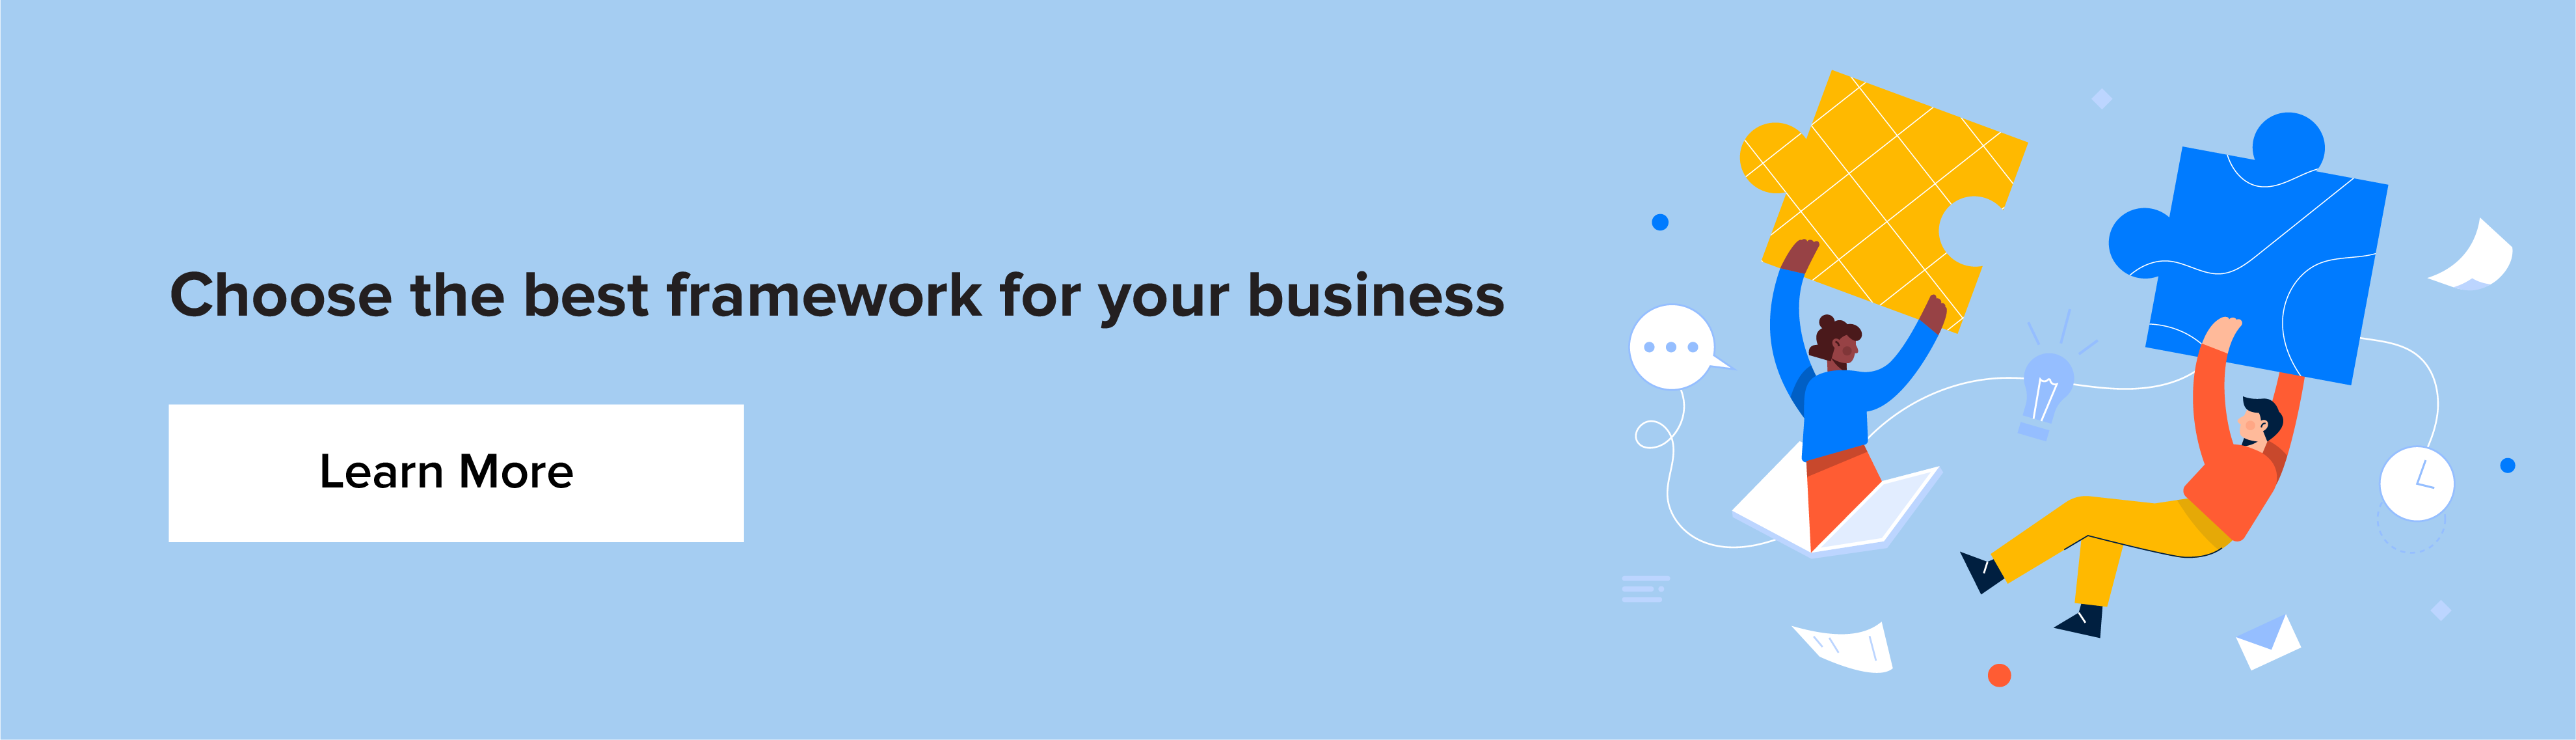 Framework for your business